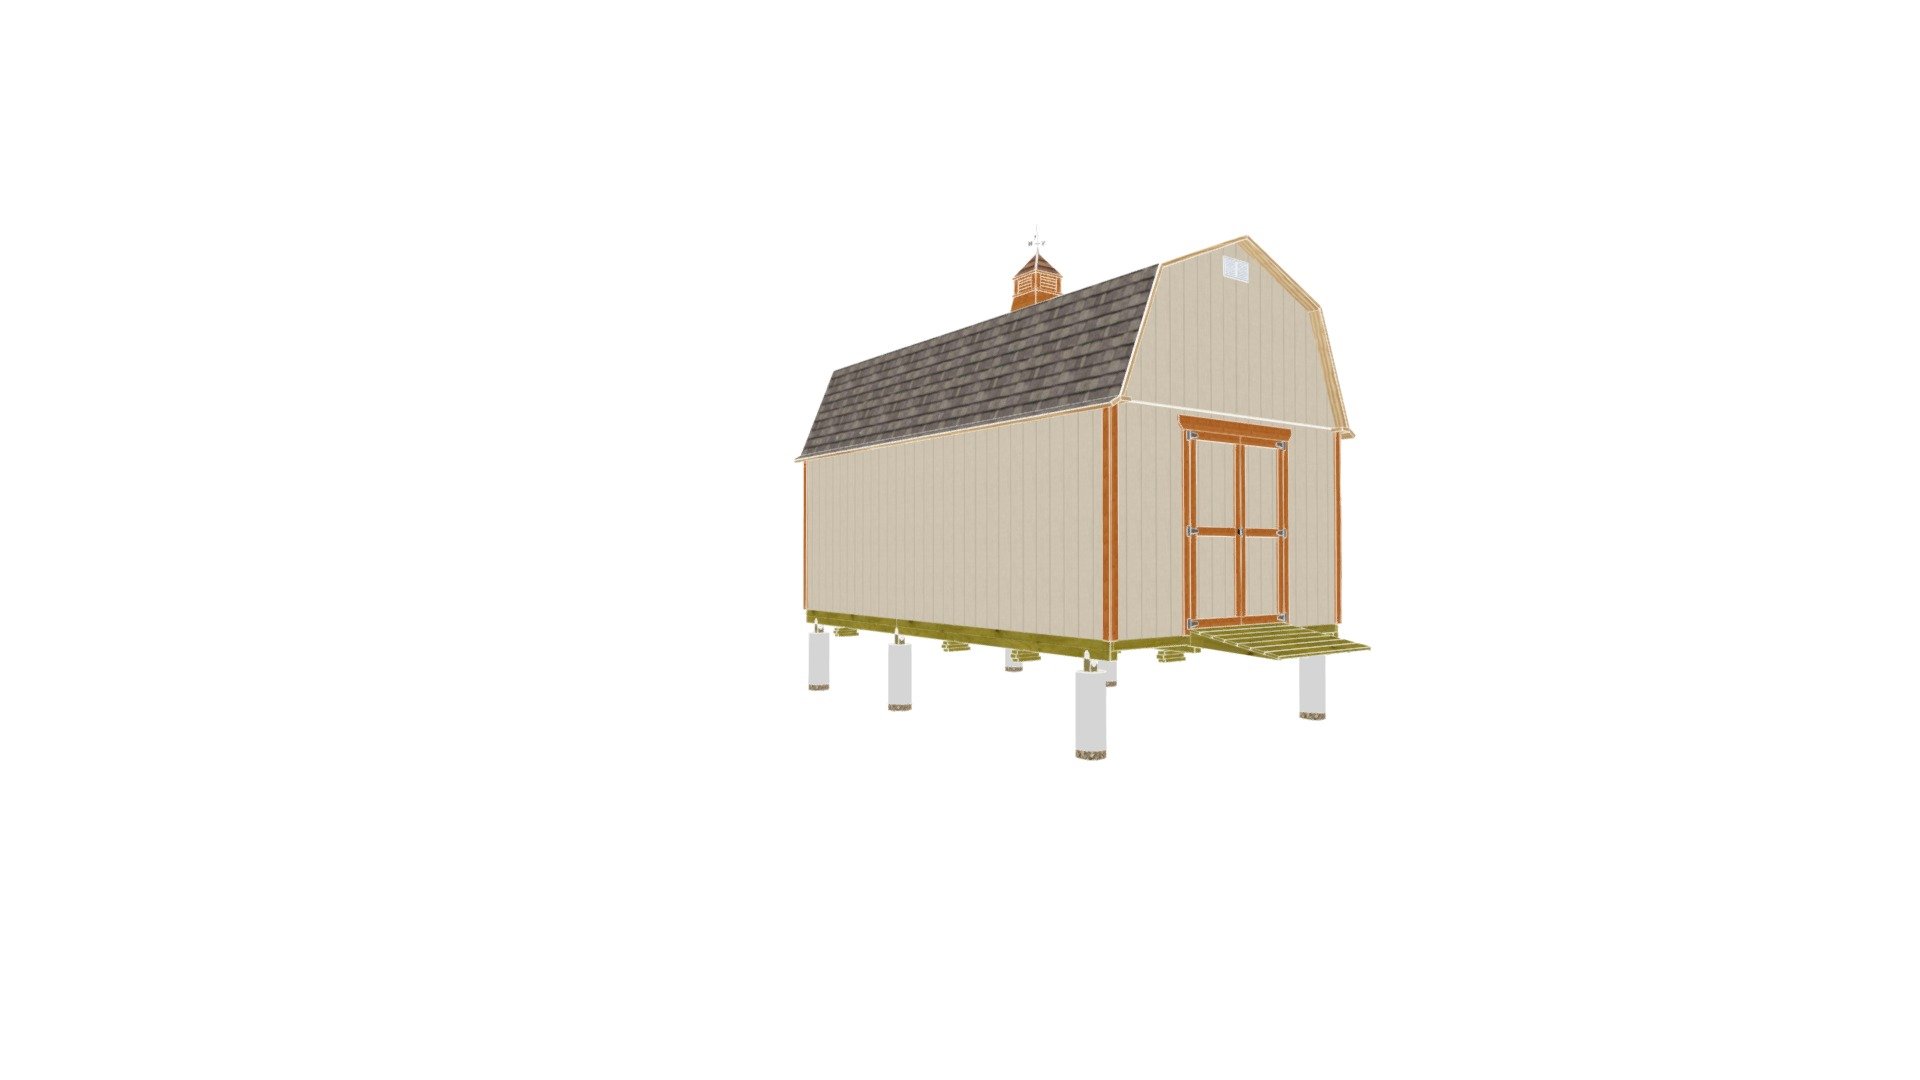 12x20 Barn Shed Plans